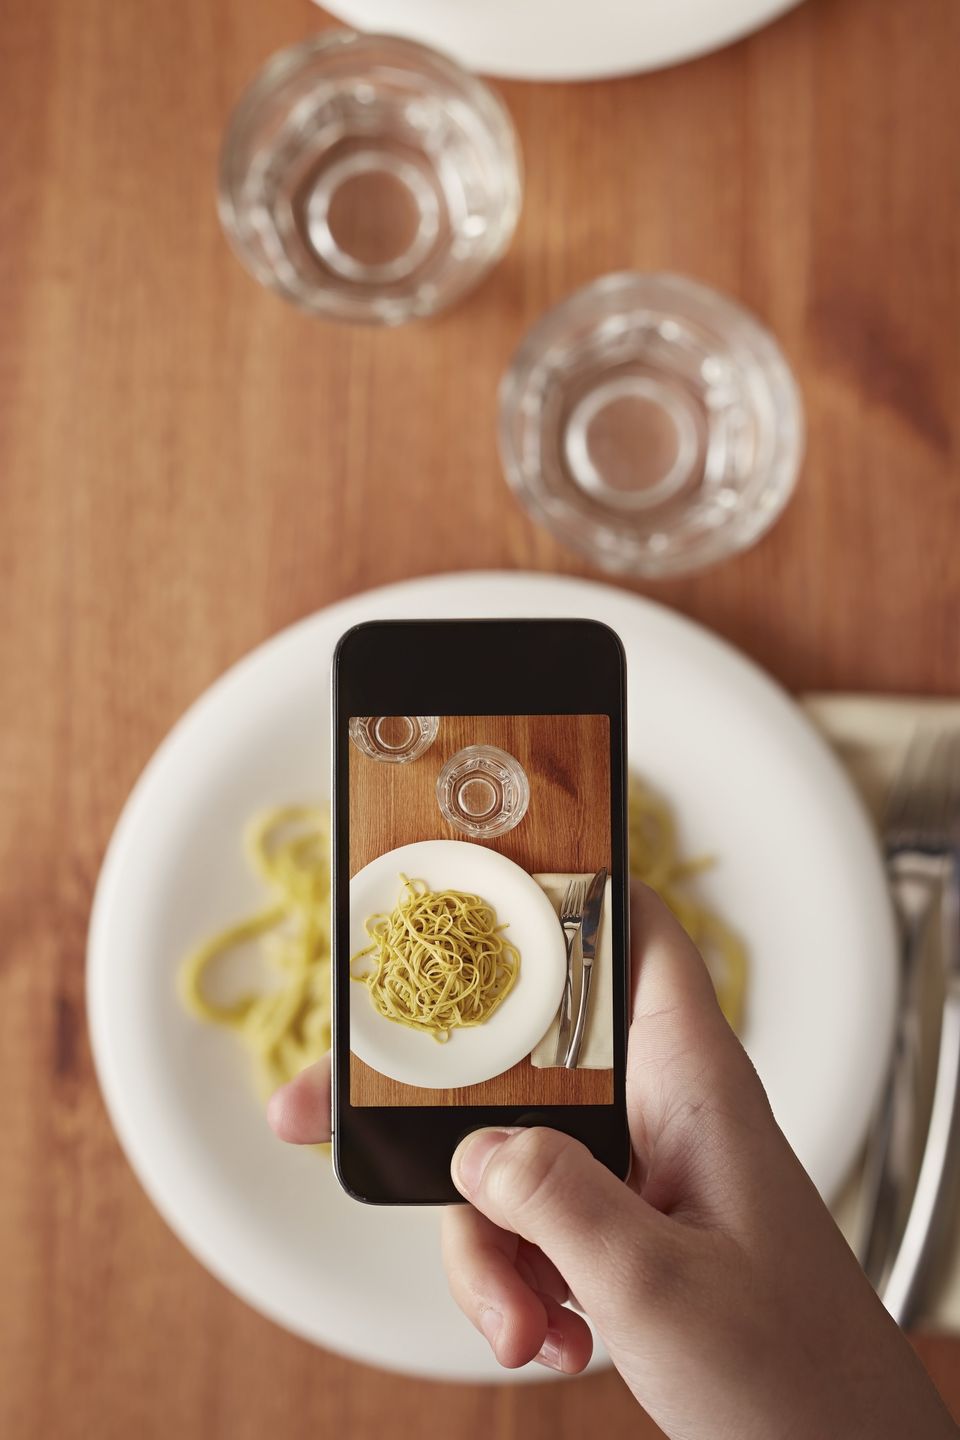 Your food goes cold because you're too busy taking Instagram photos of it